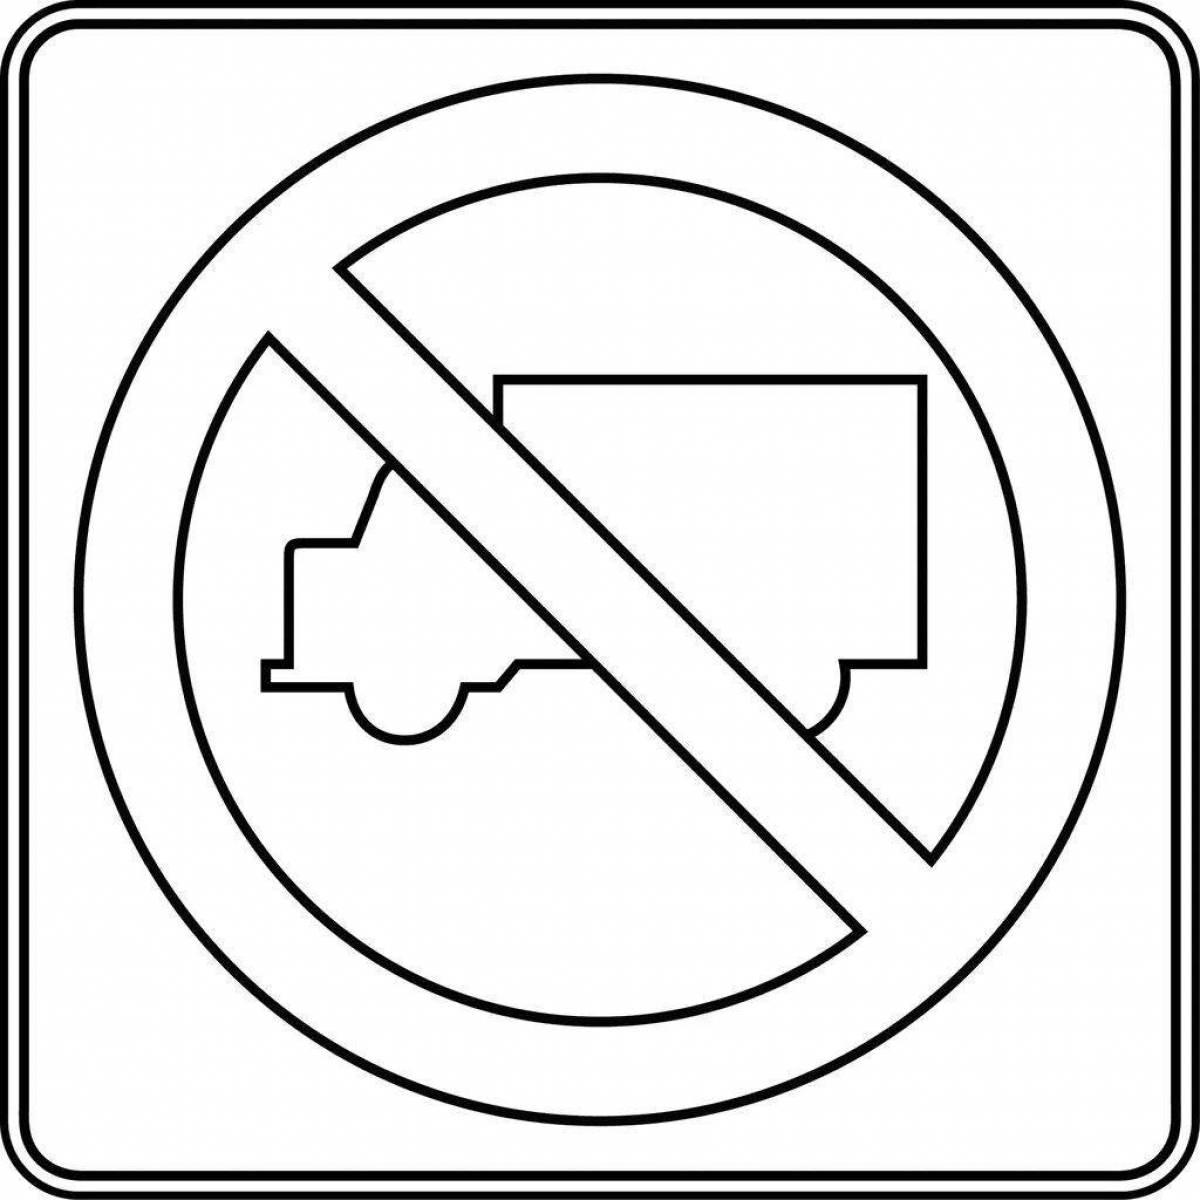 Bike prohibited dynamic coloring page